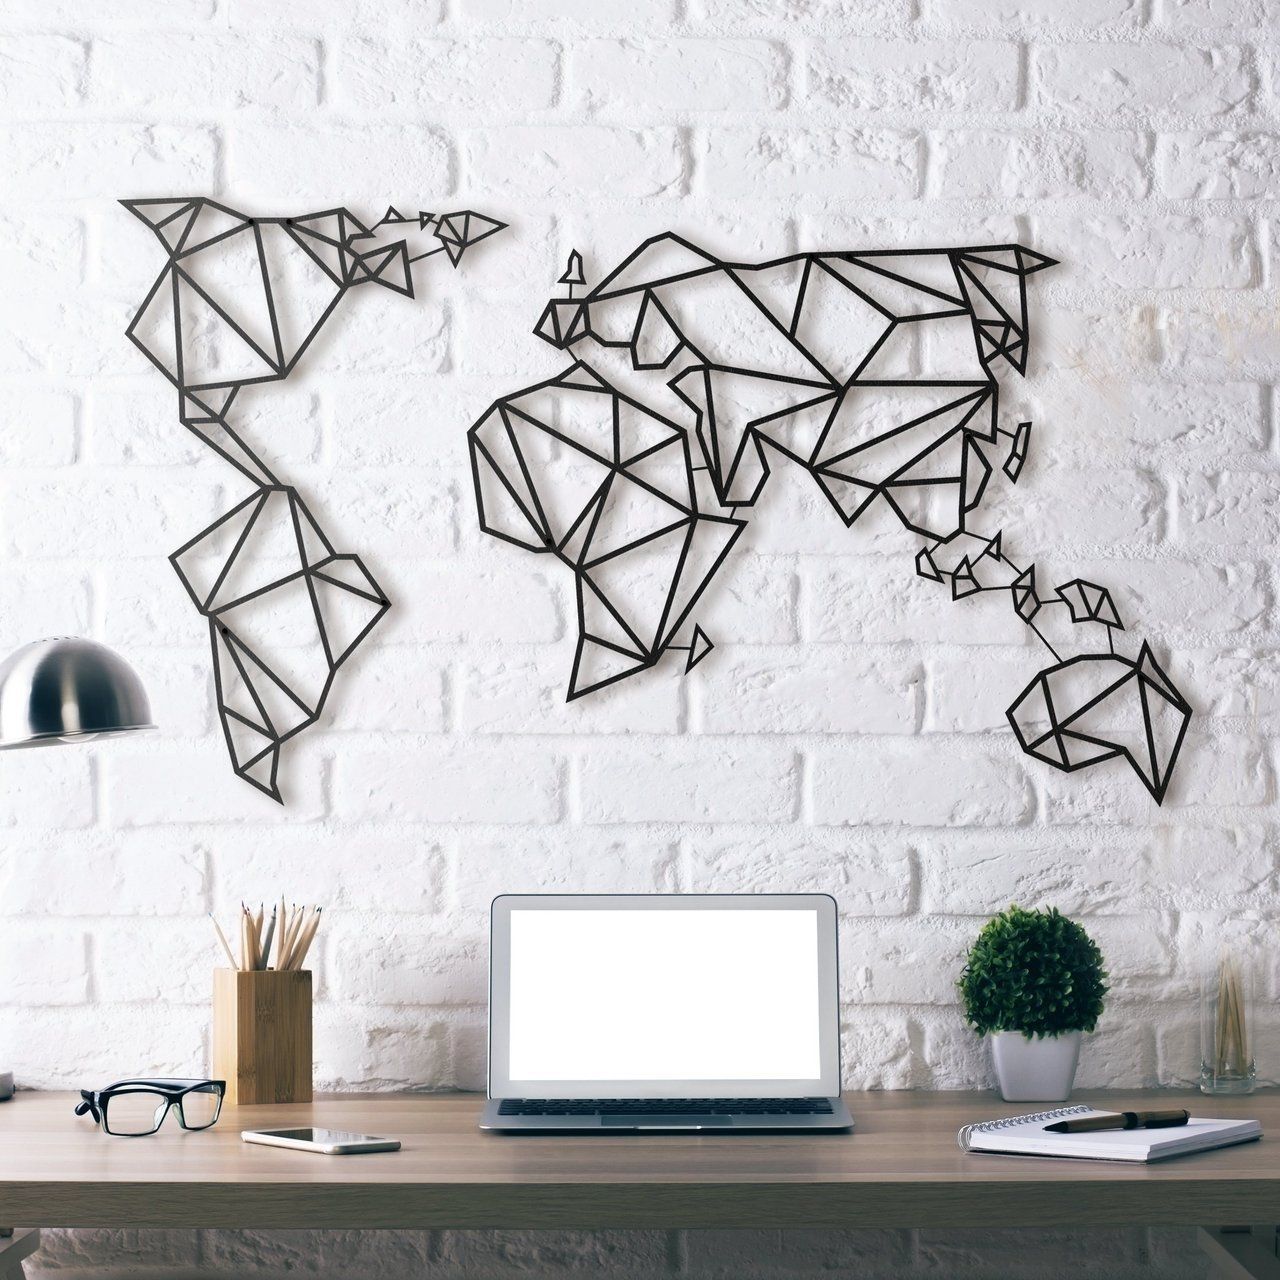 Specifications‾‾‾‾‾‾‾‾‾‾‾‾‾‾‾‾‾‾‾‾‾‾‾‾‾‾‾‾‾‾‾ Measures: 100cm Width Pertaining To World Map Wall Art (Photo 4 of 20)